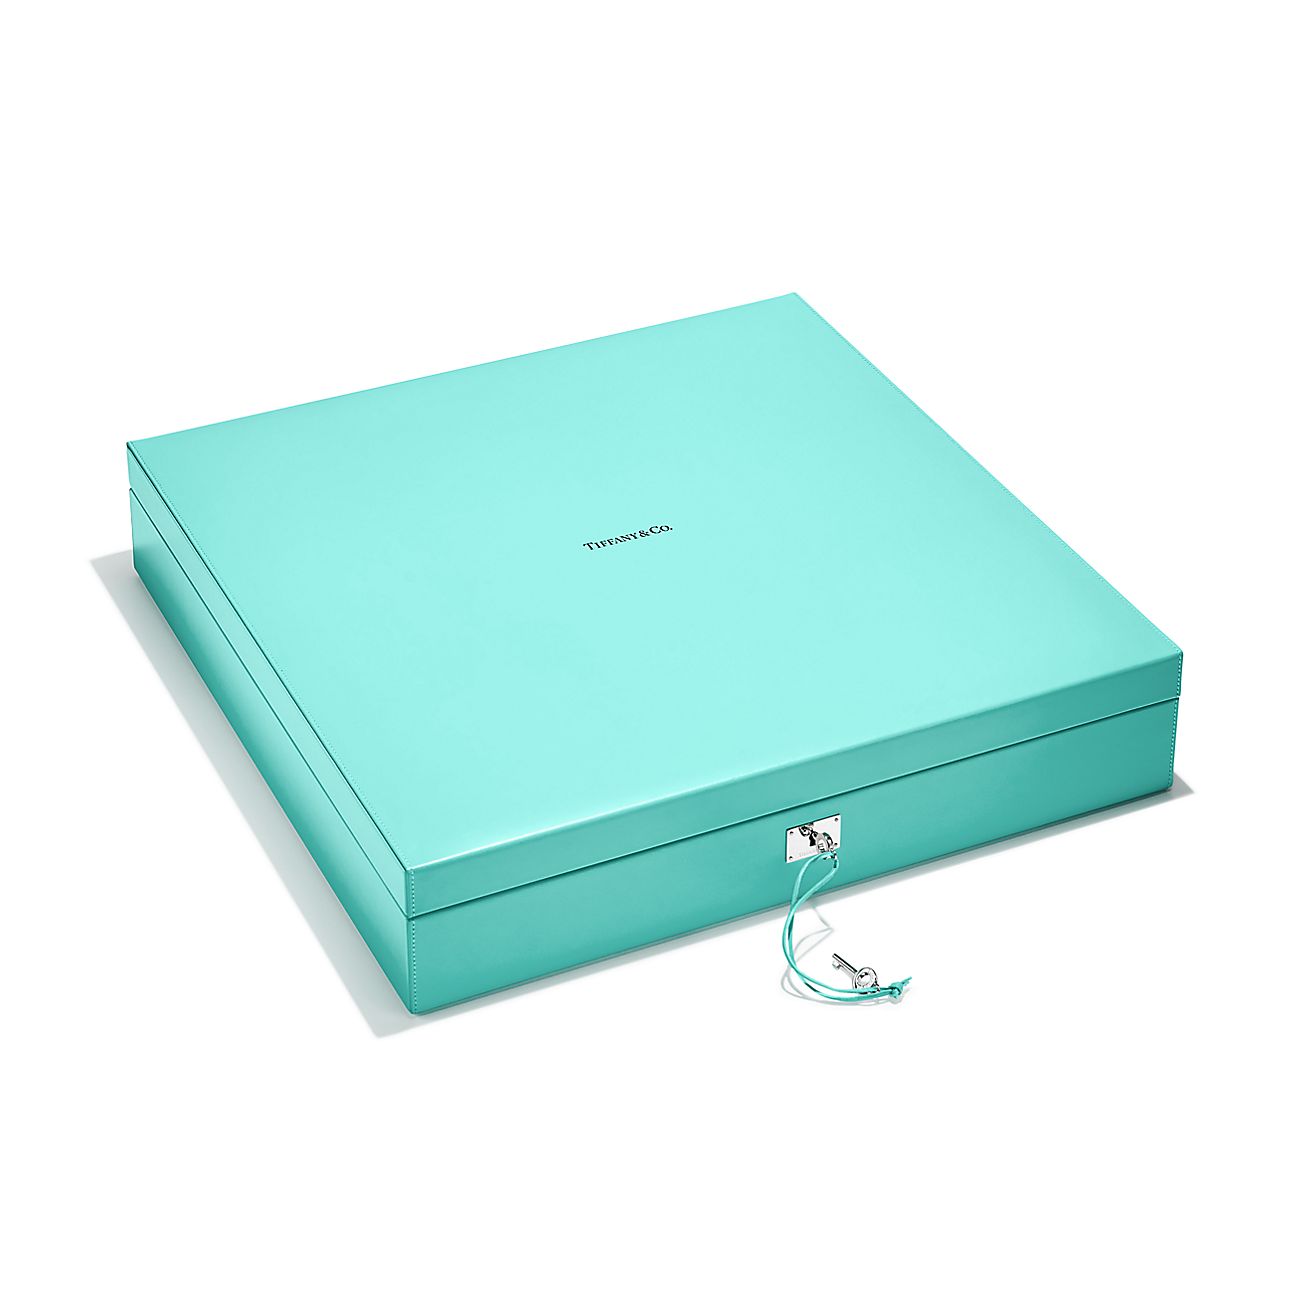 Play mahjong in luxury with Tiffany & Co.'s RM62,000 luxury set